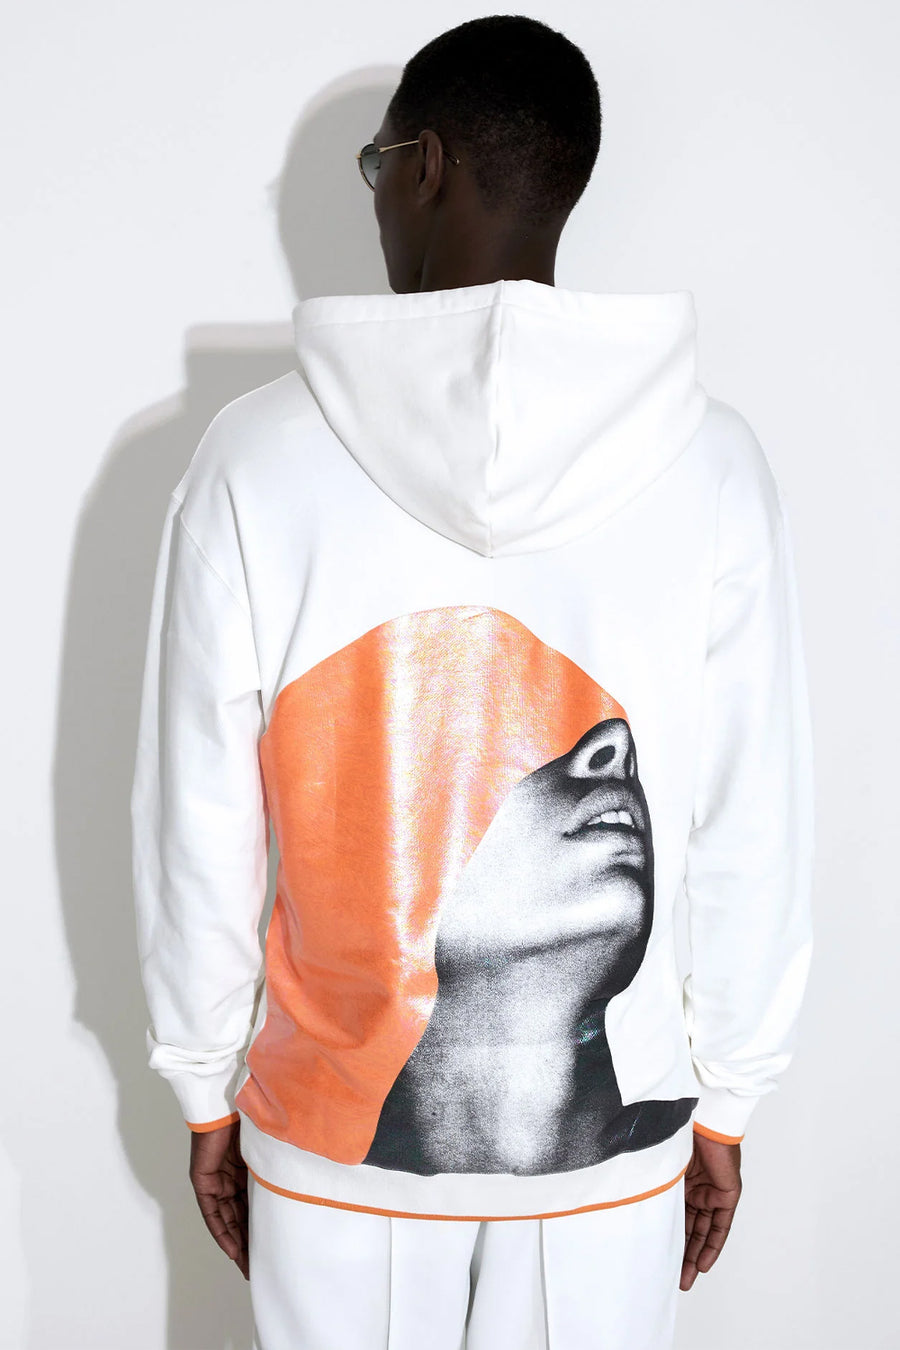 Buy the Limitato OR 2 Hoodie in White at Intro. Spend £50 for free UK delivery. Official stockists. We ship worldwide.